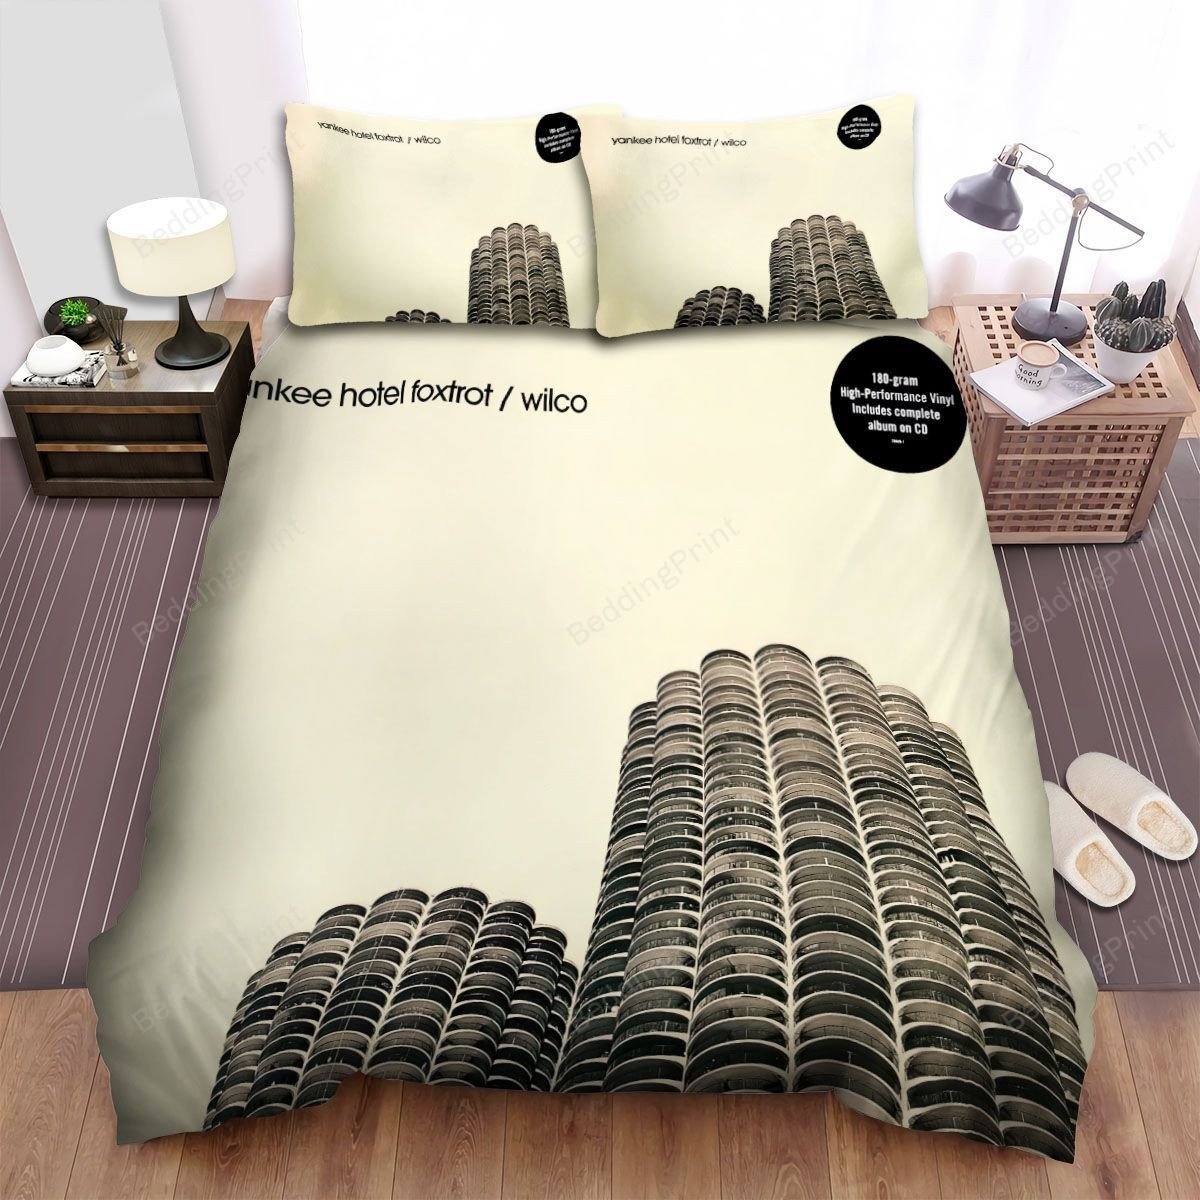 Yankee Hotel Foxtrot Wilco Bed Sheets Duvet Cover Bedding Sets